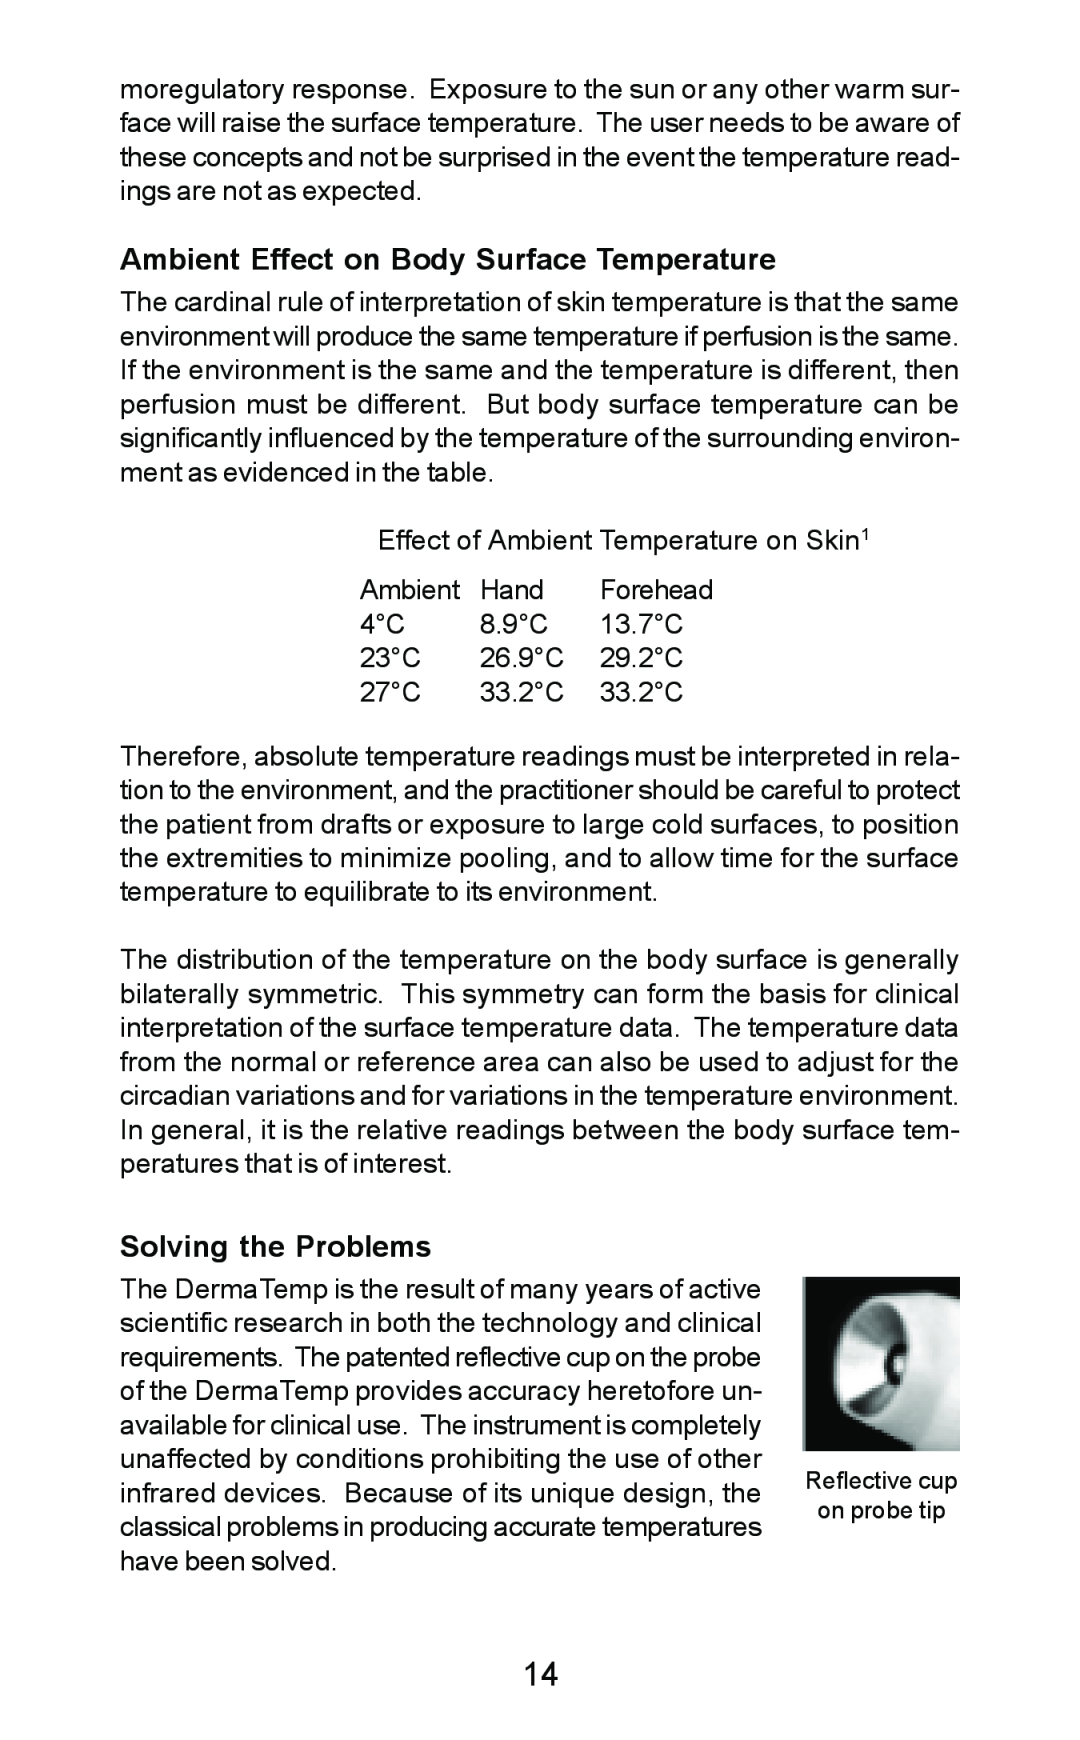 Exergen DT 1001-RS, DT 1001-LT, DT 1001-LN manual Ambient Effect on Body Surface Temperature, Solving the Problems 